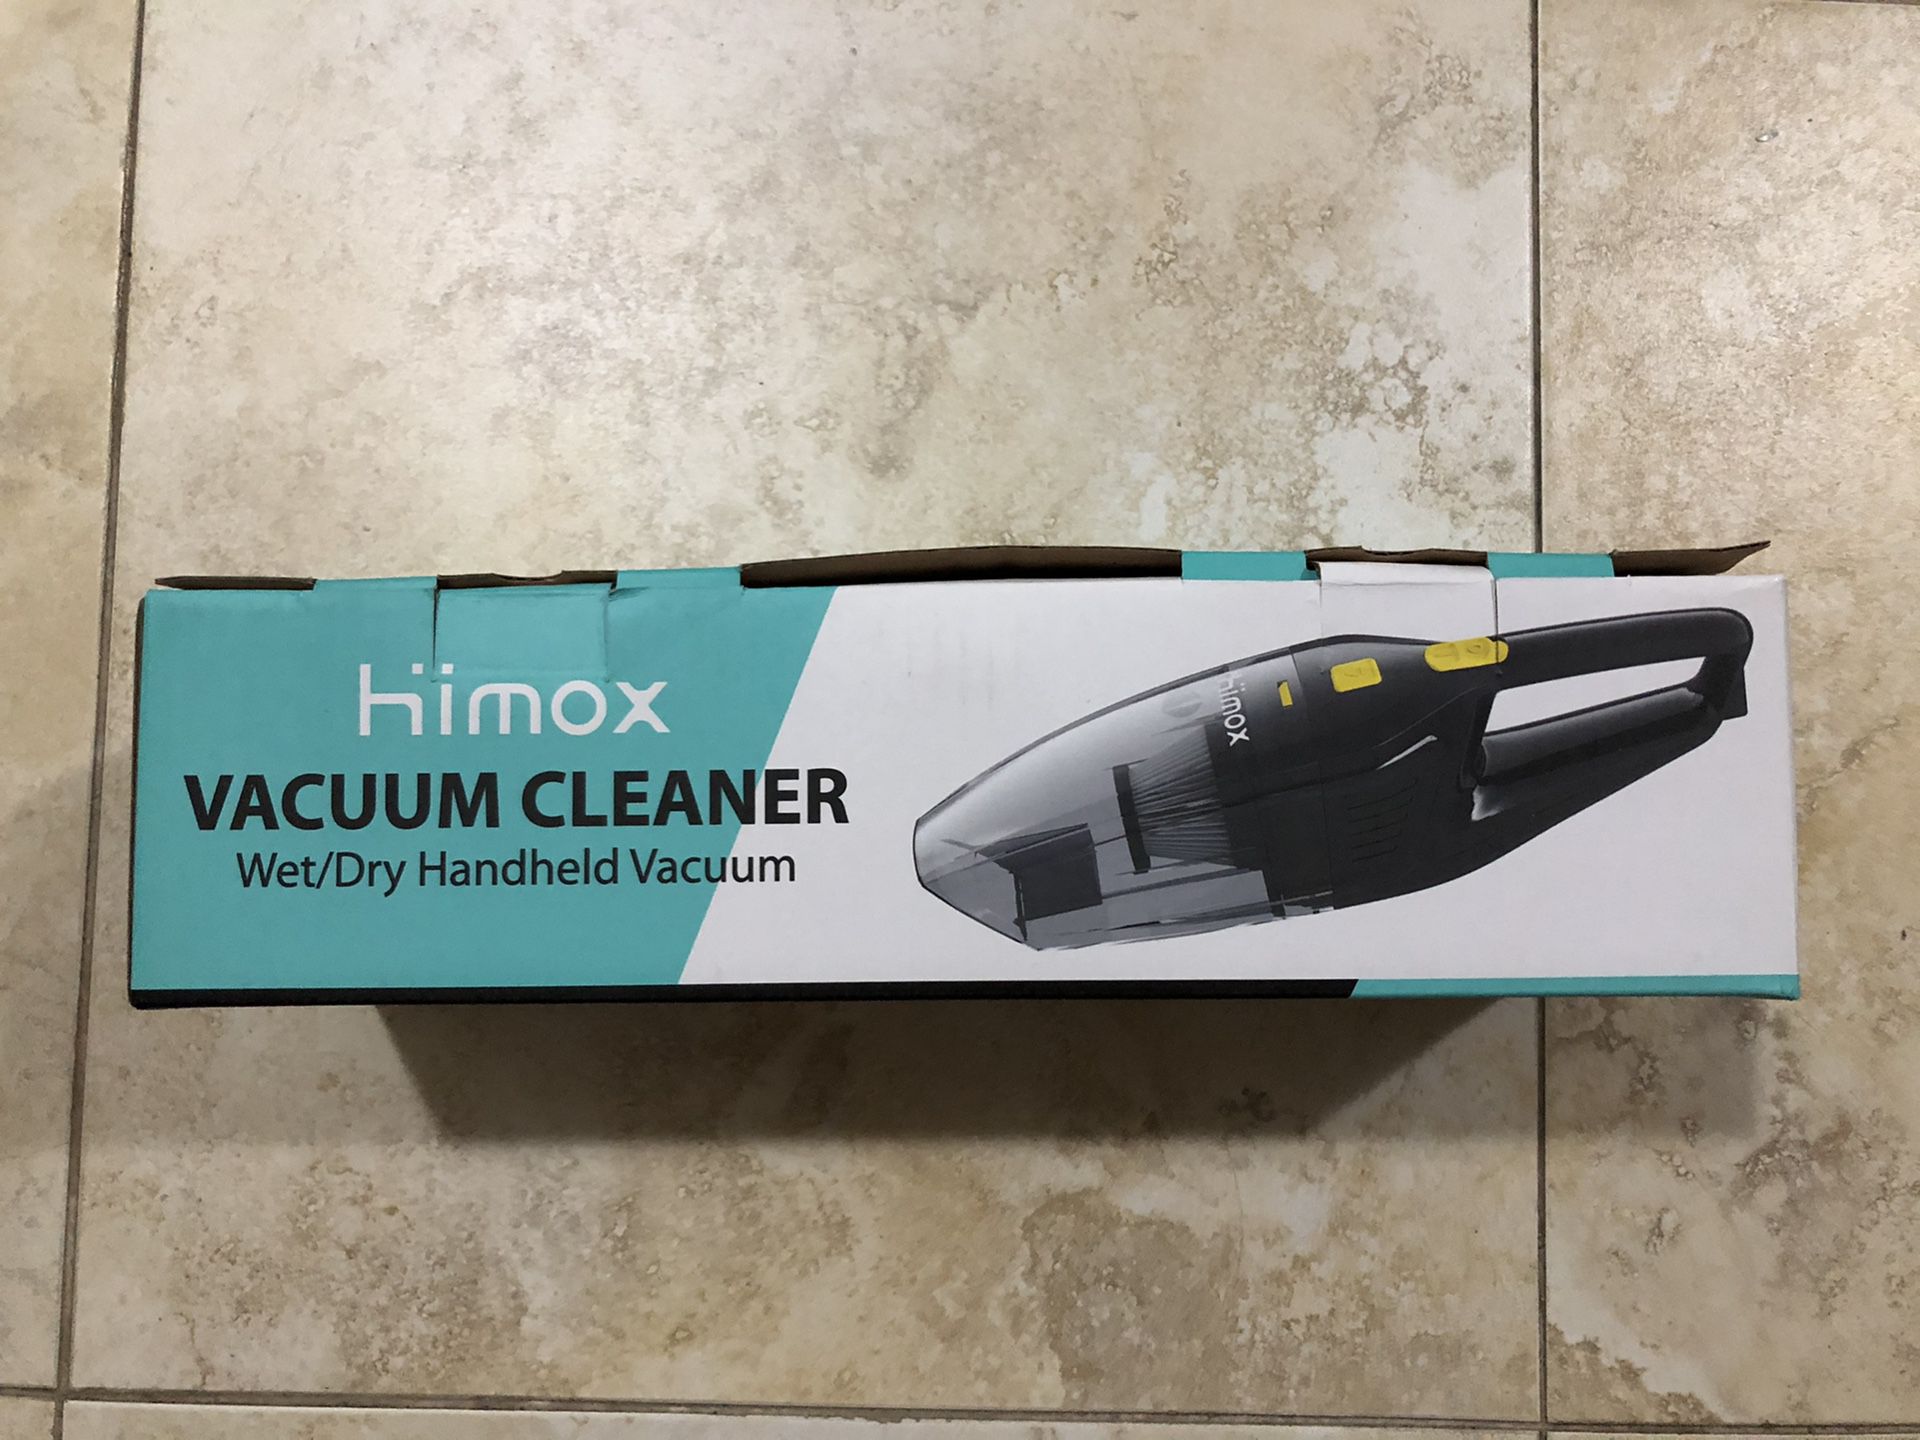 HIMOX 80000pa 120W strong suction handheld vacuum, rechargeable cordless hand vacuum cleaner with powerful cyclonic suction/2 filters and 5 attachmen